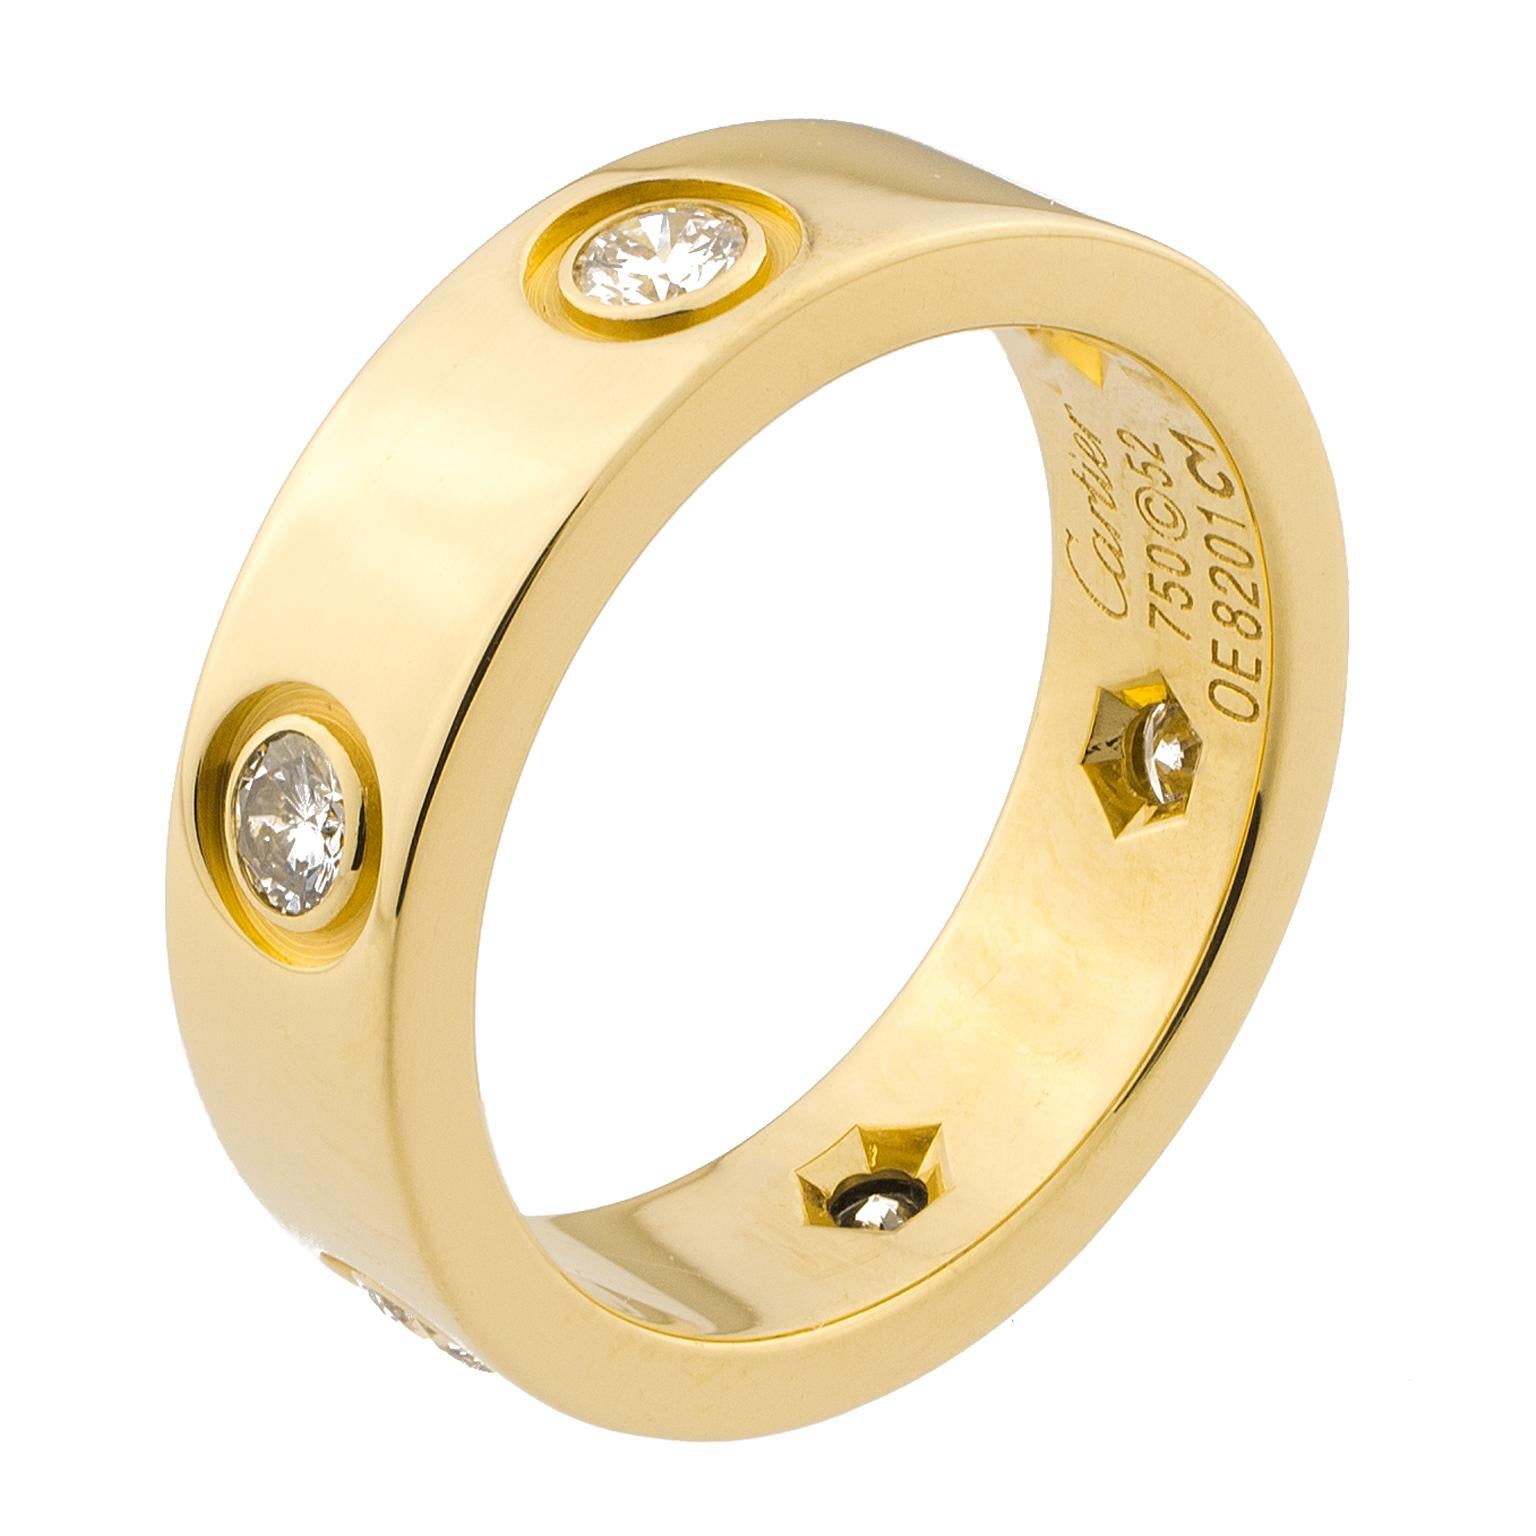 Gold Cartier ring belonging to the Love Ring collection, set with 6 round brilliant cut diamonds totalling 0.42 carats.

Size:
US 6 1/8
UK L 3/4
Swiss 12